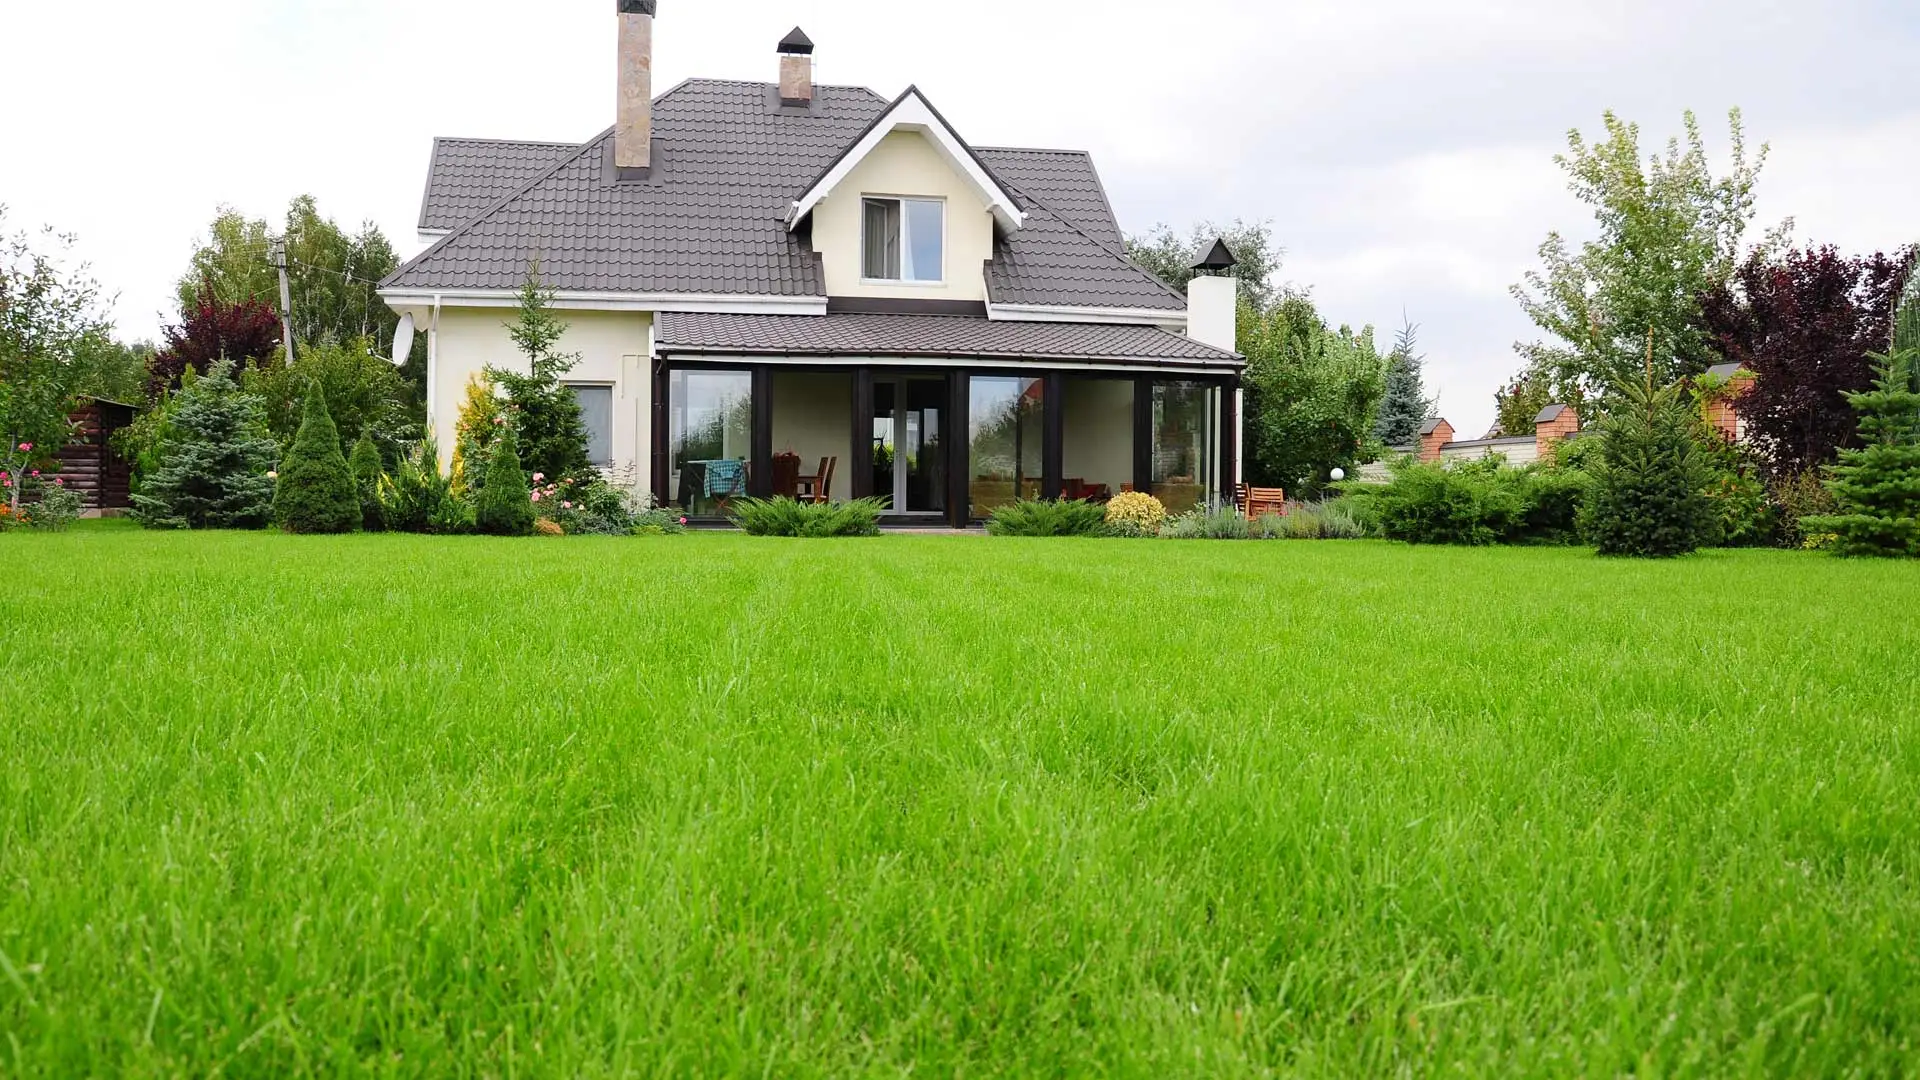 Want a Weed-Free Lawn? Use Both Pre- & Post-Emergent Weed Control